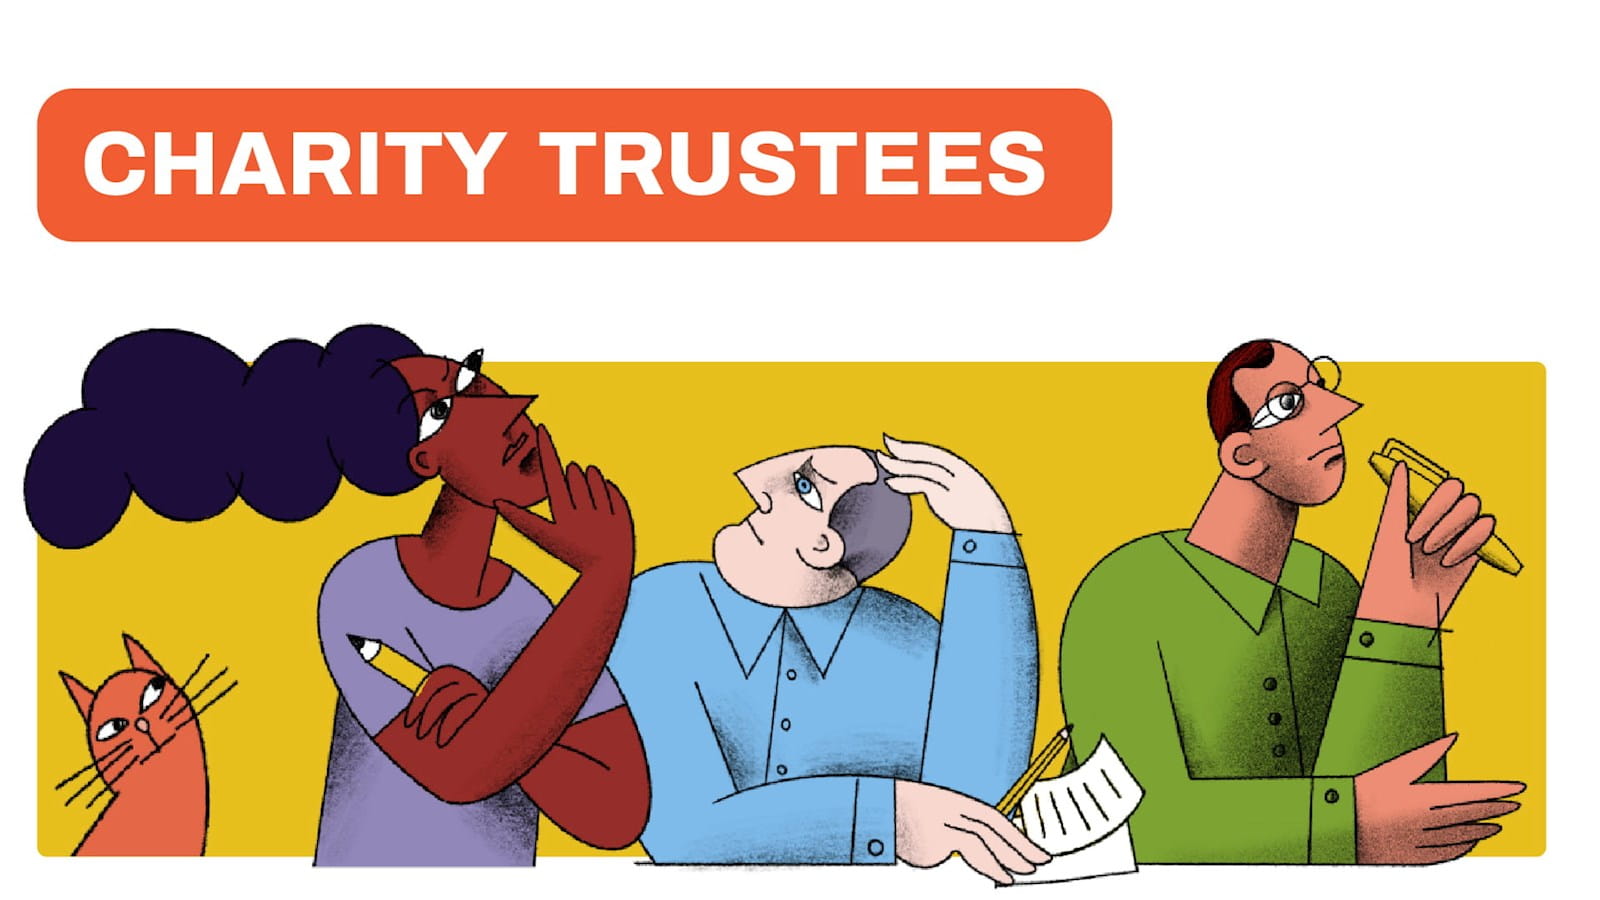 Promotional image for Charity Commission's 'being a charity trustee/ campaign